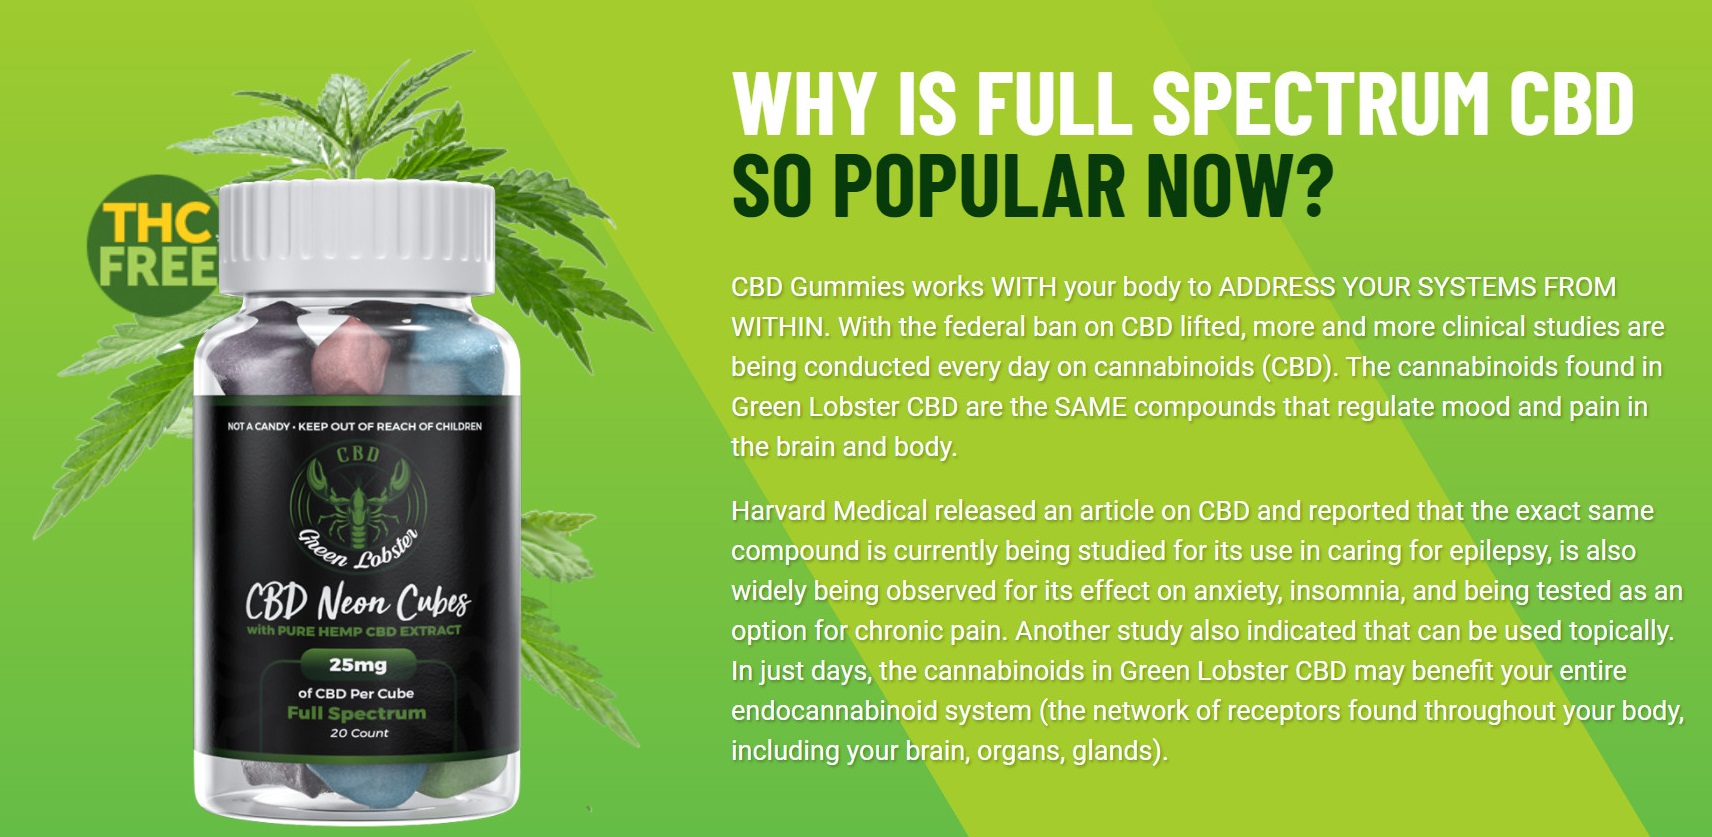 Green Lobster CBD Neon Cubes Gummies Why Need